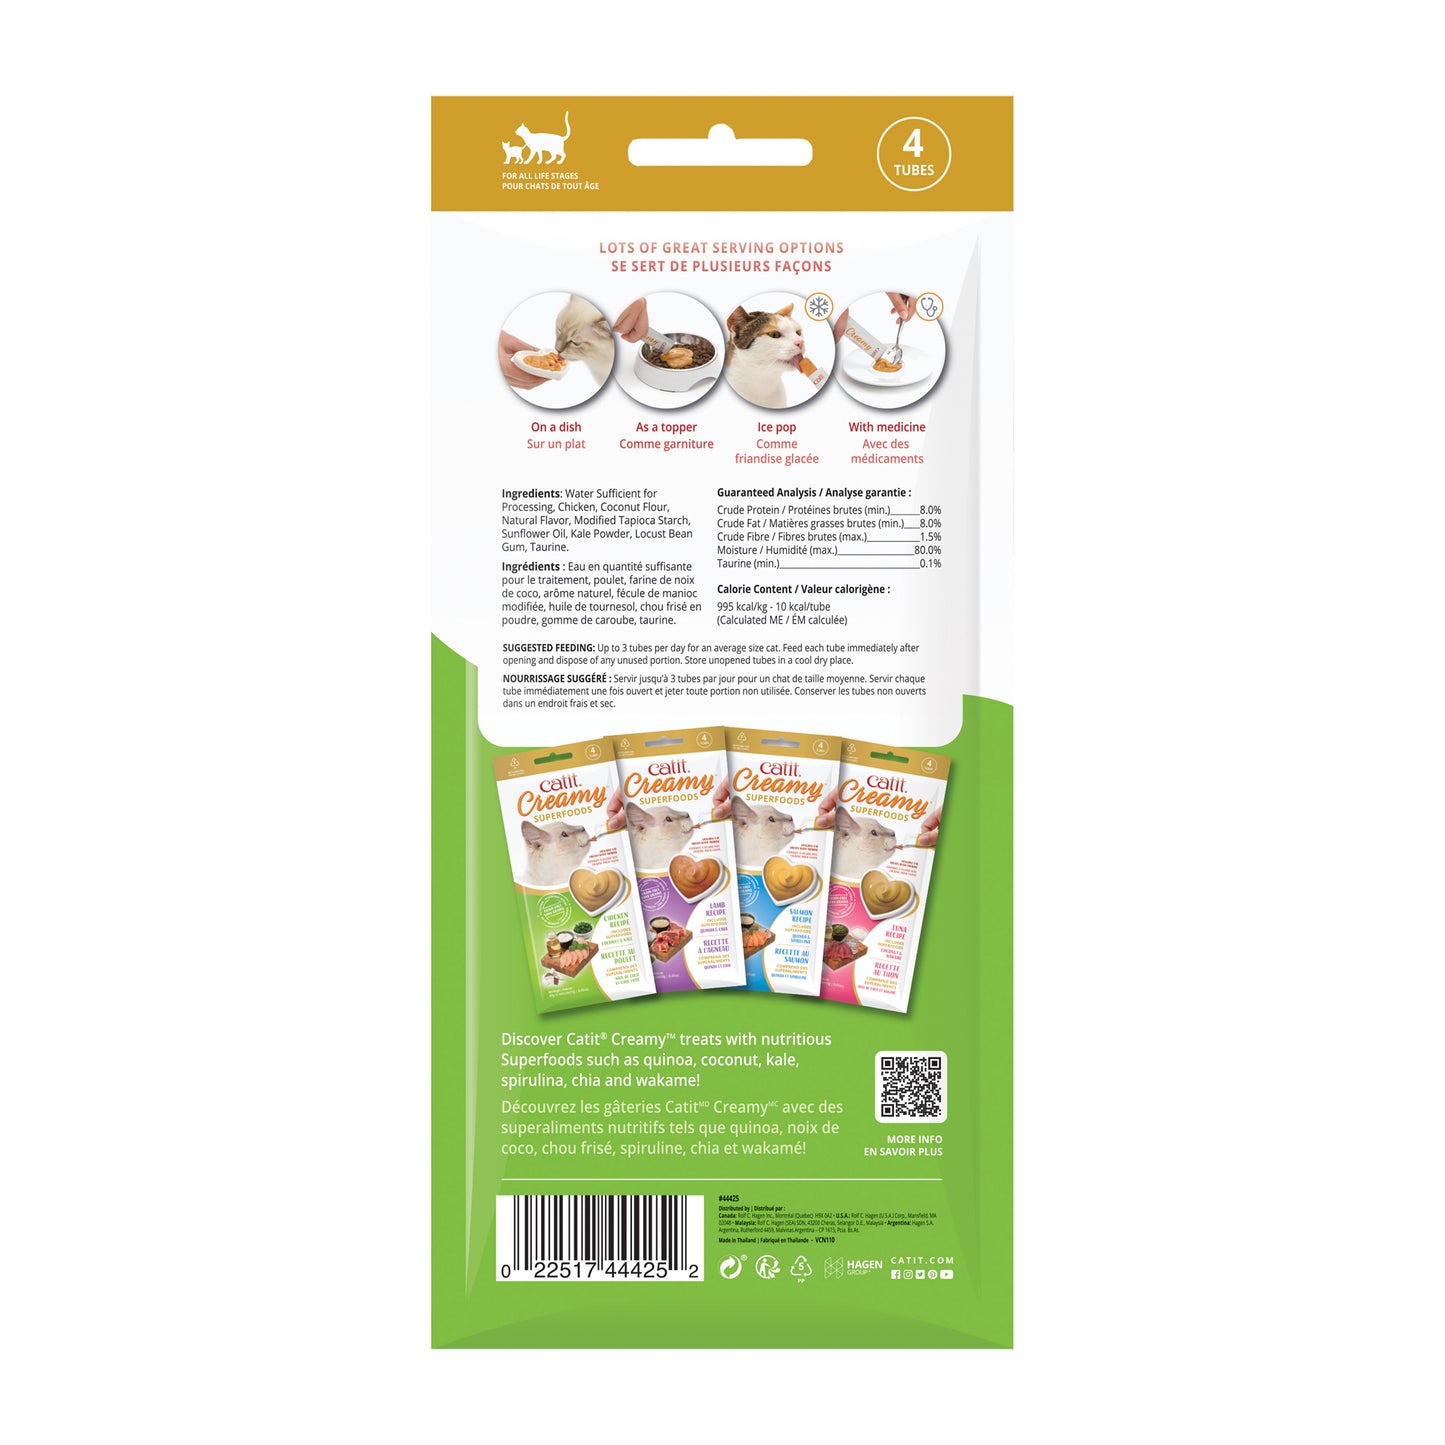 Catit Creamy Superfood Treats Chicken with Coconut & Kale  Cat Treats  | PetMax Canada